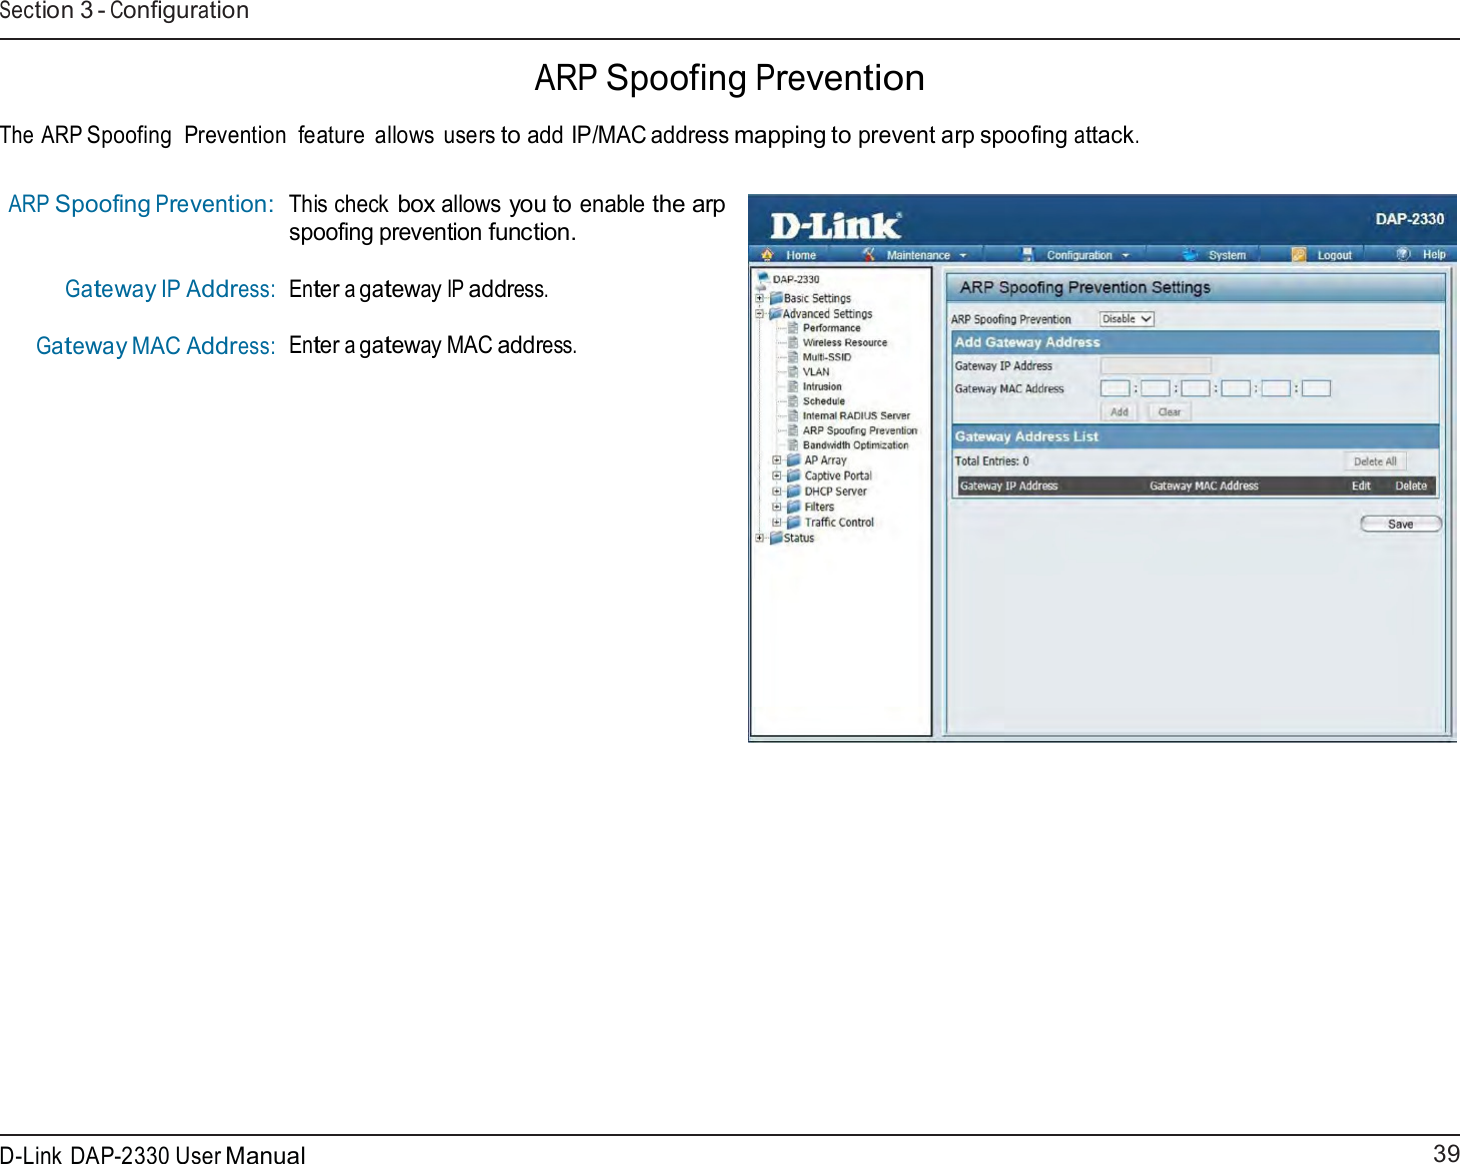 39 D-Link DAP-2330 User ManualSection 3 - Configuration      ARP Spoofing Prevention  The ARP Spoofing  Prevention  feature  allows users to add IP/MAC address mapping to prevent arp spoofing attack.   ARP Spoofing Prevention:    Gateway IP Address: Gateway MAC Address: This check box allows you to enable the arp spoofing prevention function.  Enter a gateway IP address. Enter a gateway MAC address. 